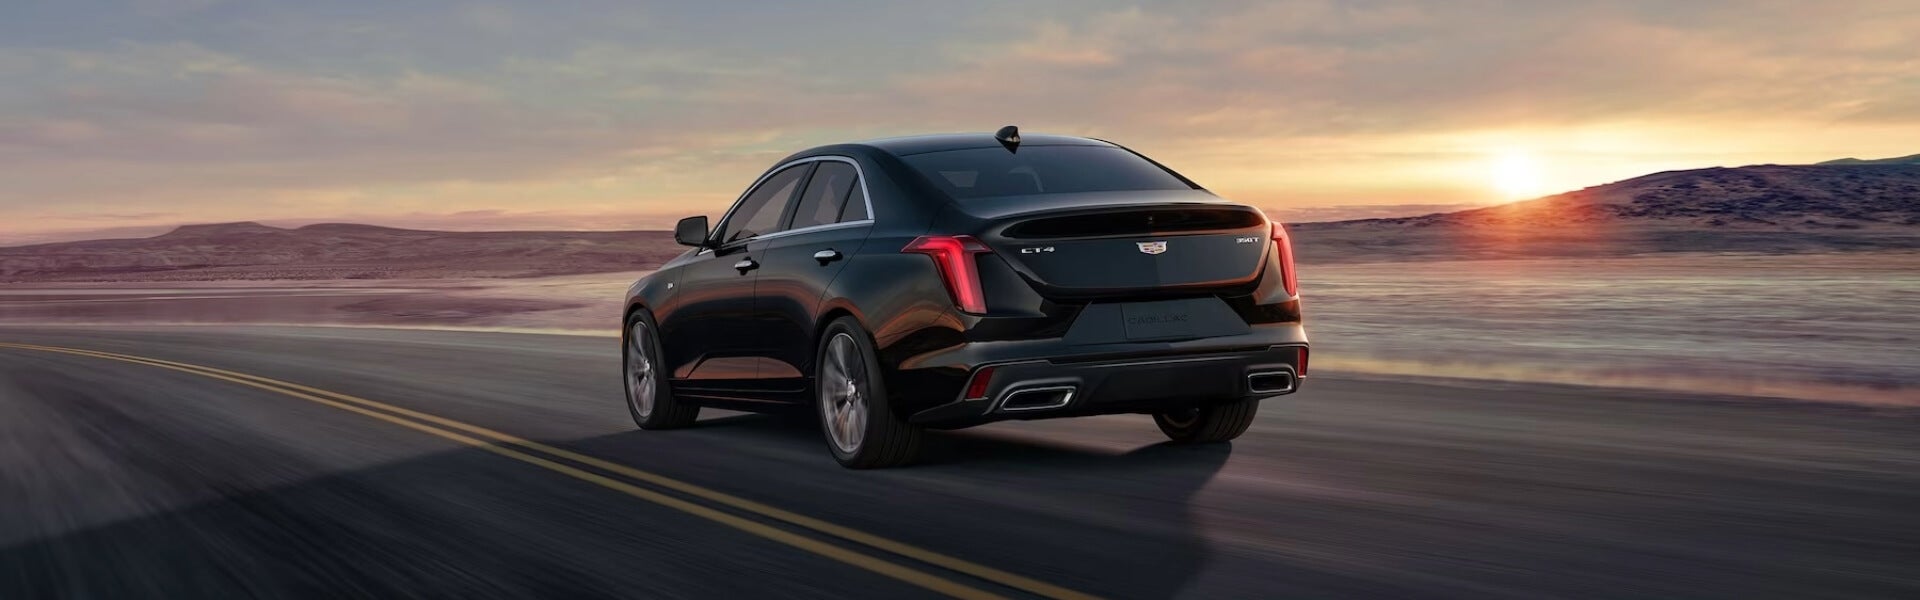 2024 Cadillac CT4 Small Luxury Sedan, Driving On A Highway With A Mountain Range and Sunset In The Background